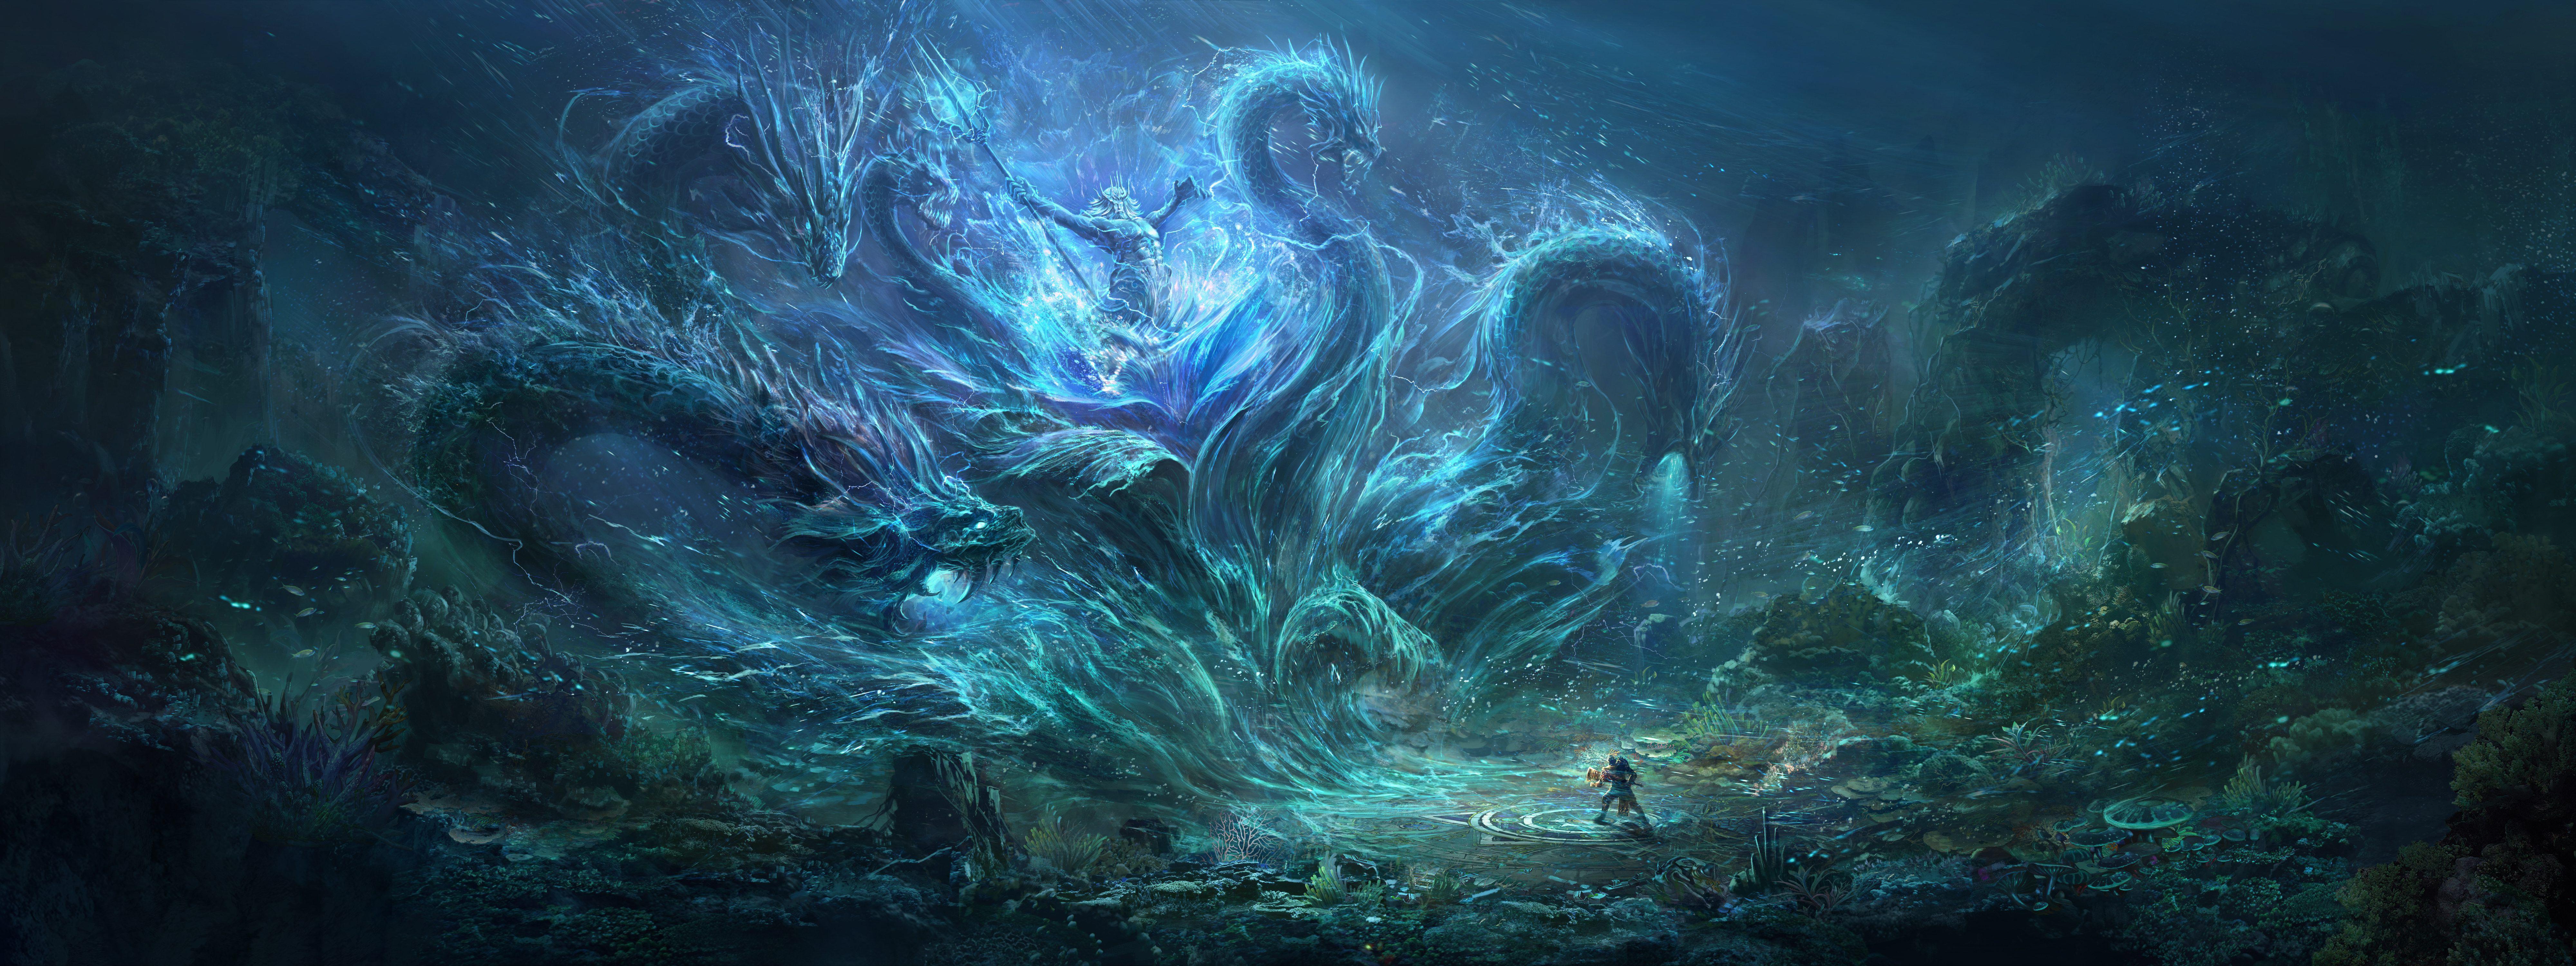 Sea Monsters 5k Retina Ultra HD Wallpapers and Backgrounds Image